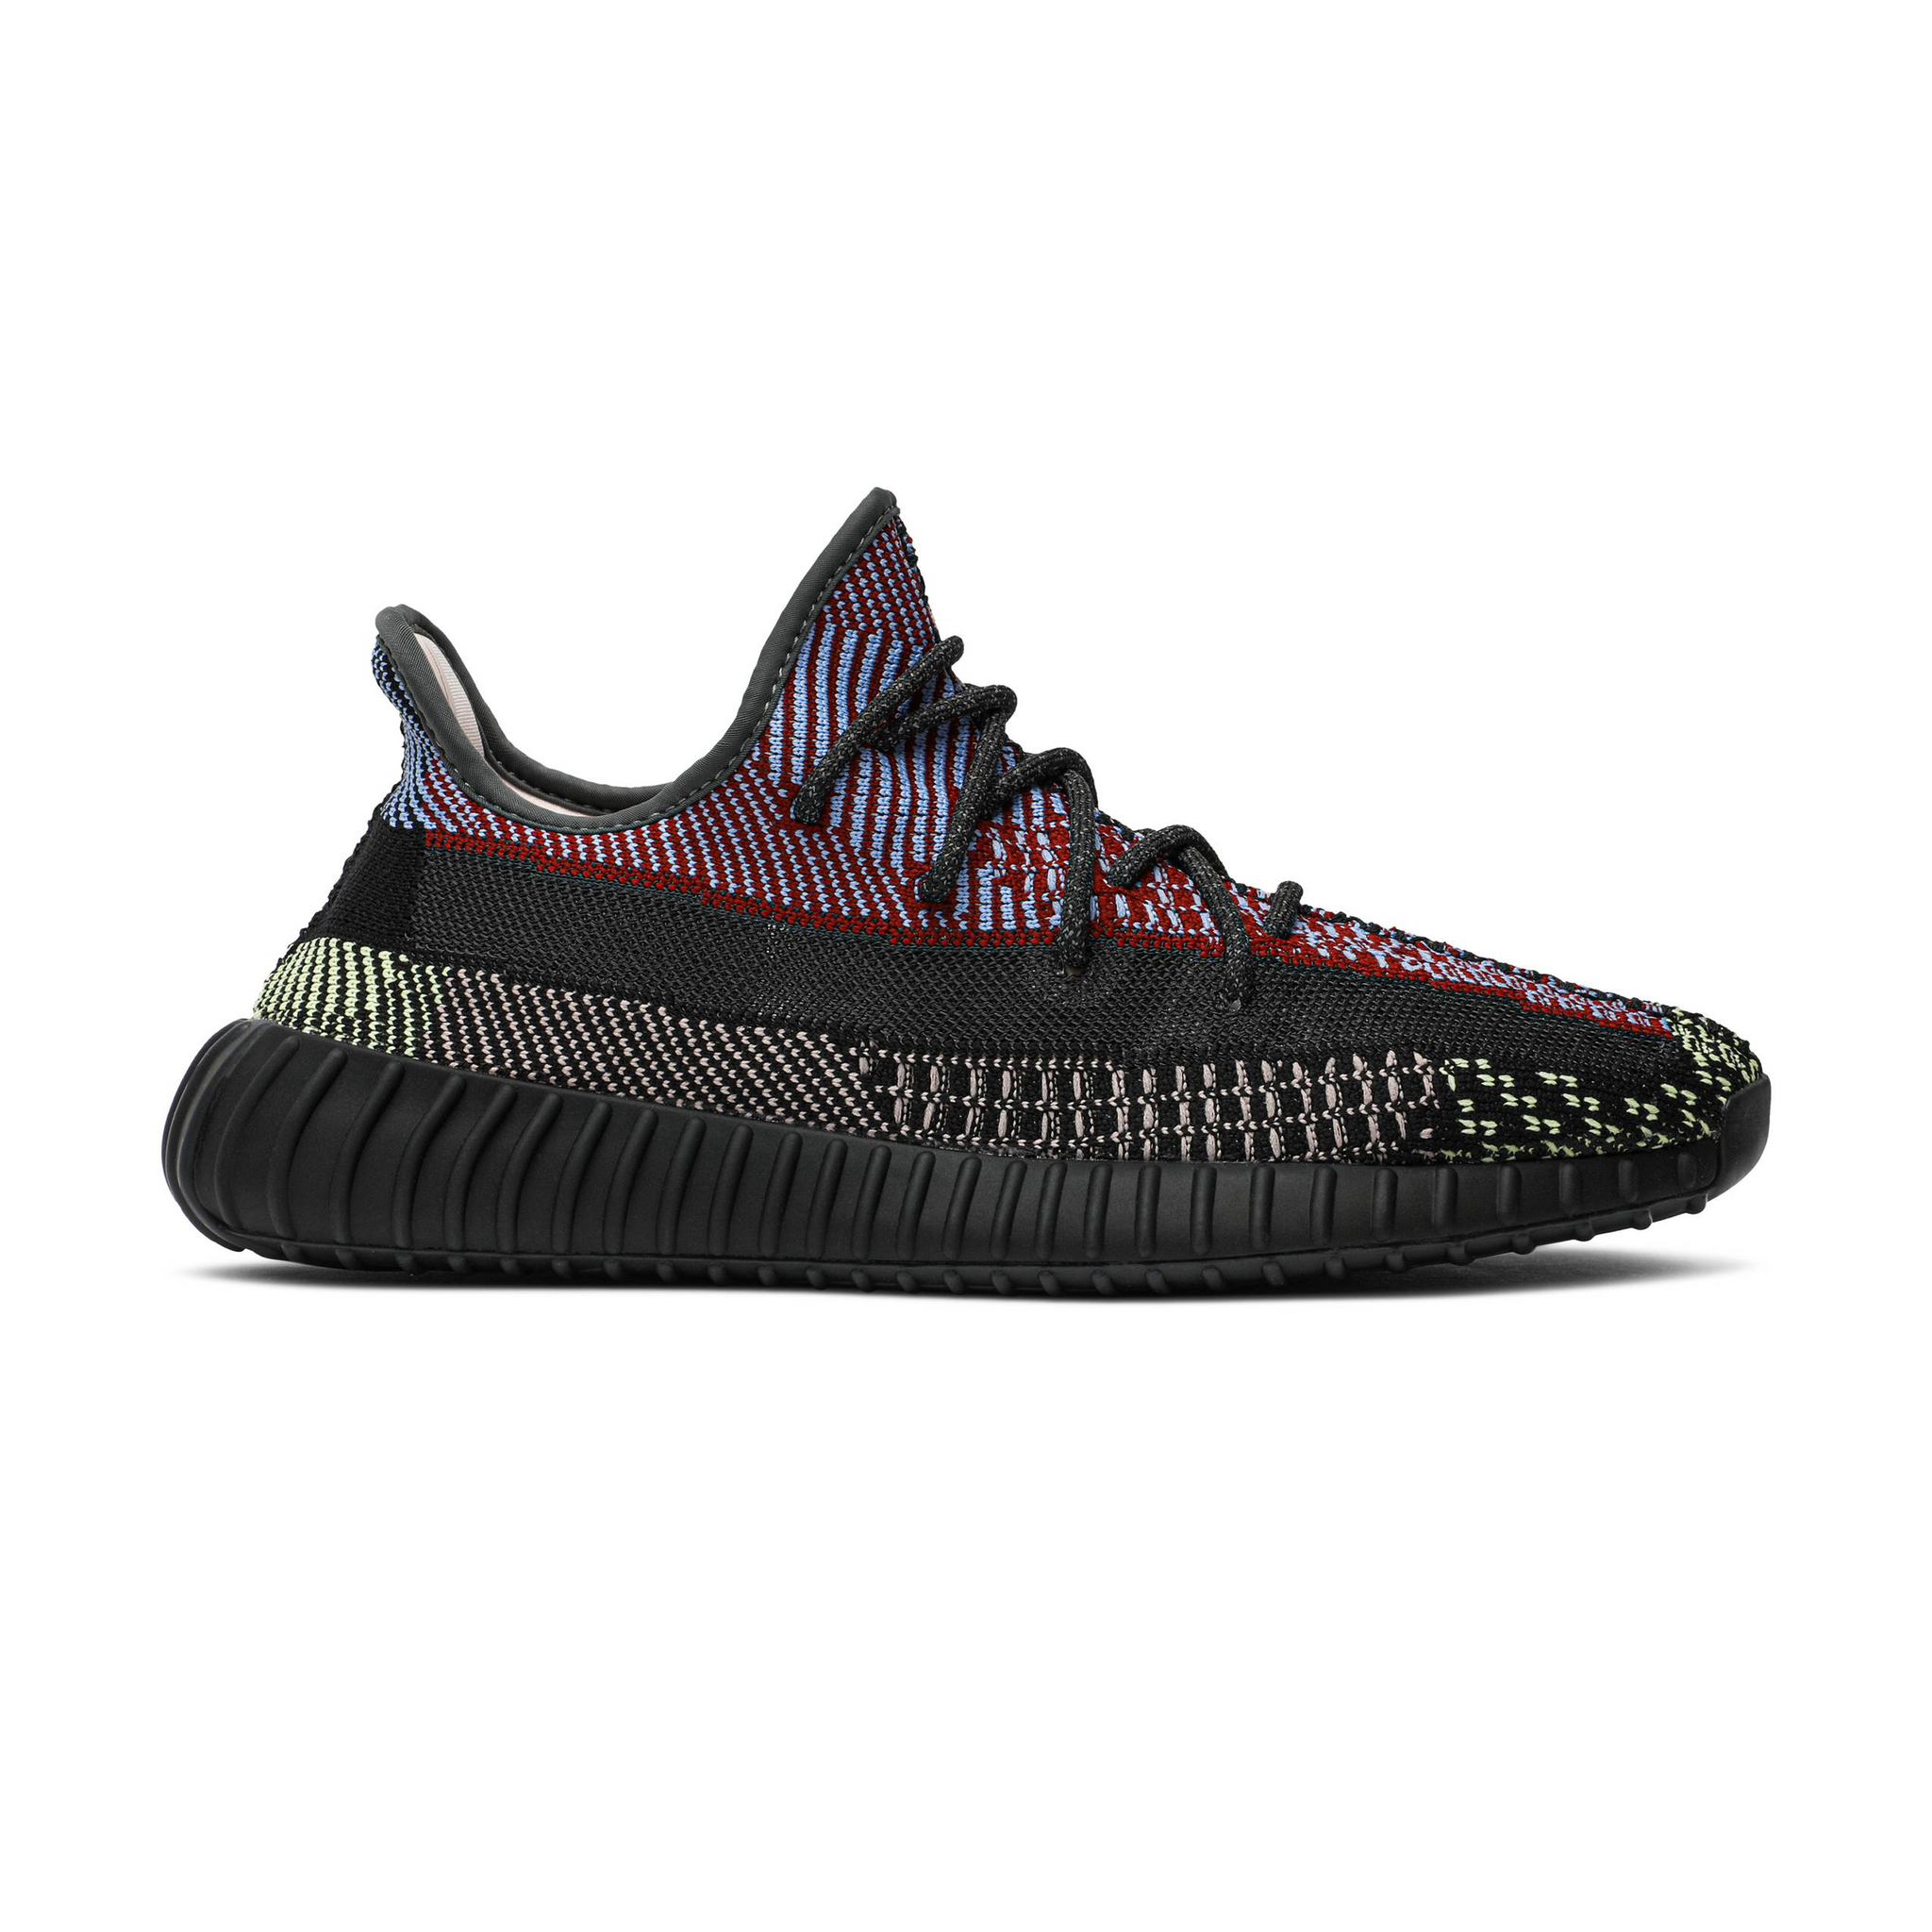 Cheap Ad Yeezy 350 Boost V2 Men Aaa Quality041